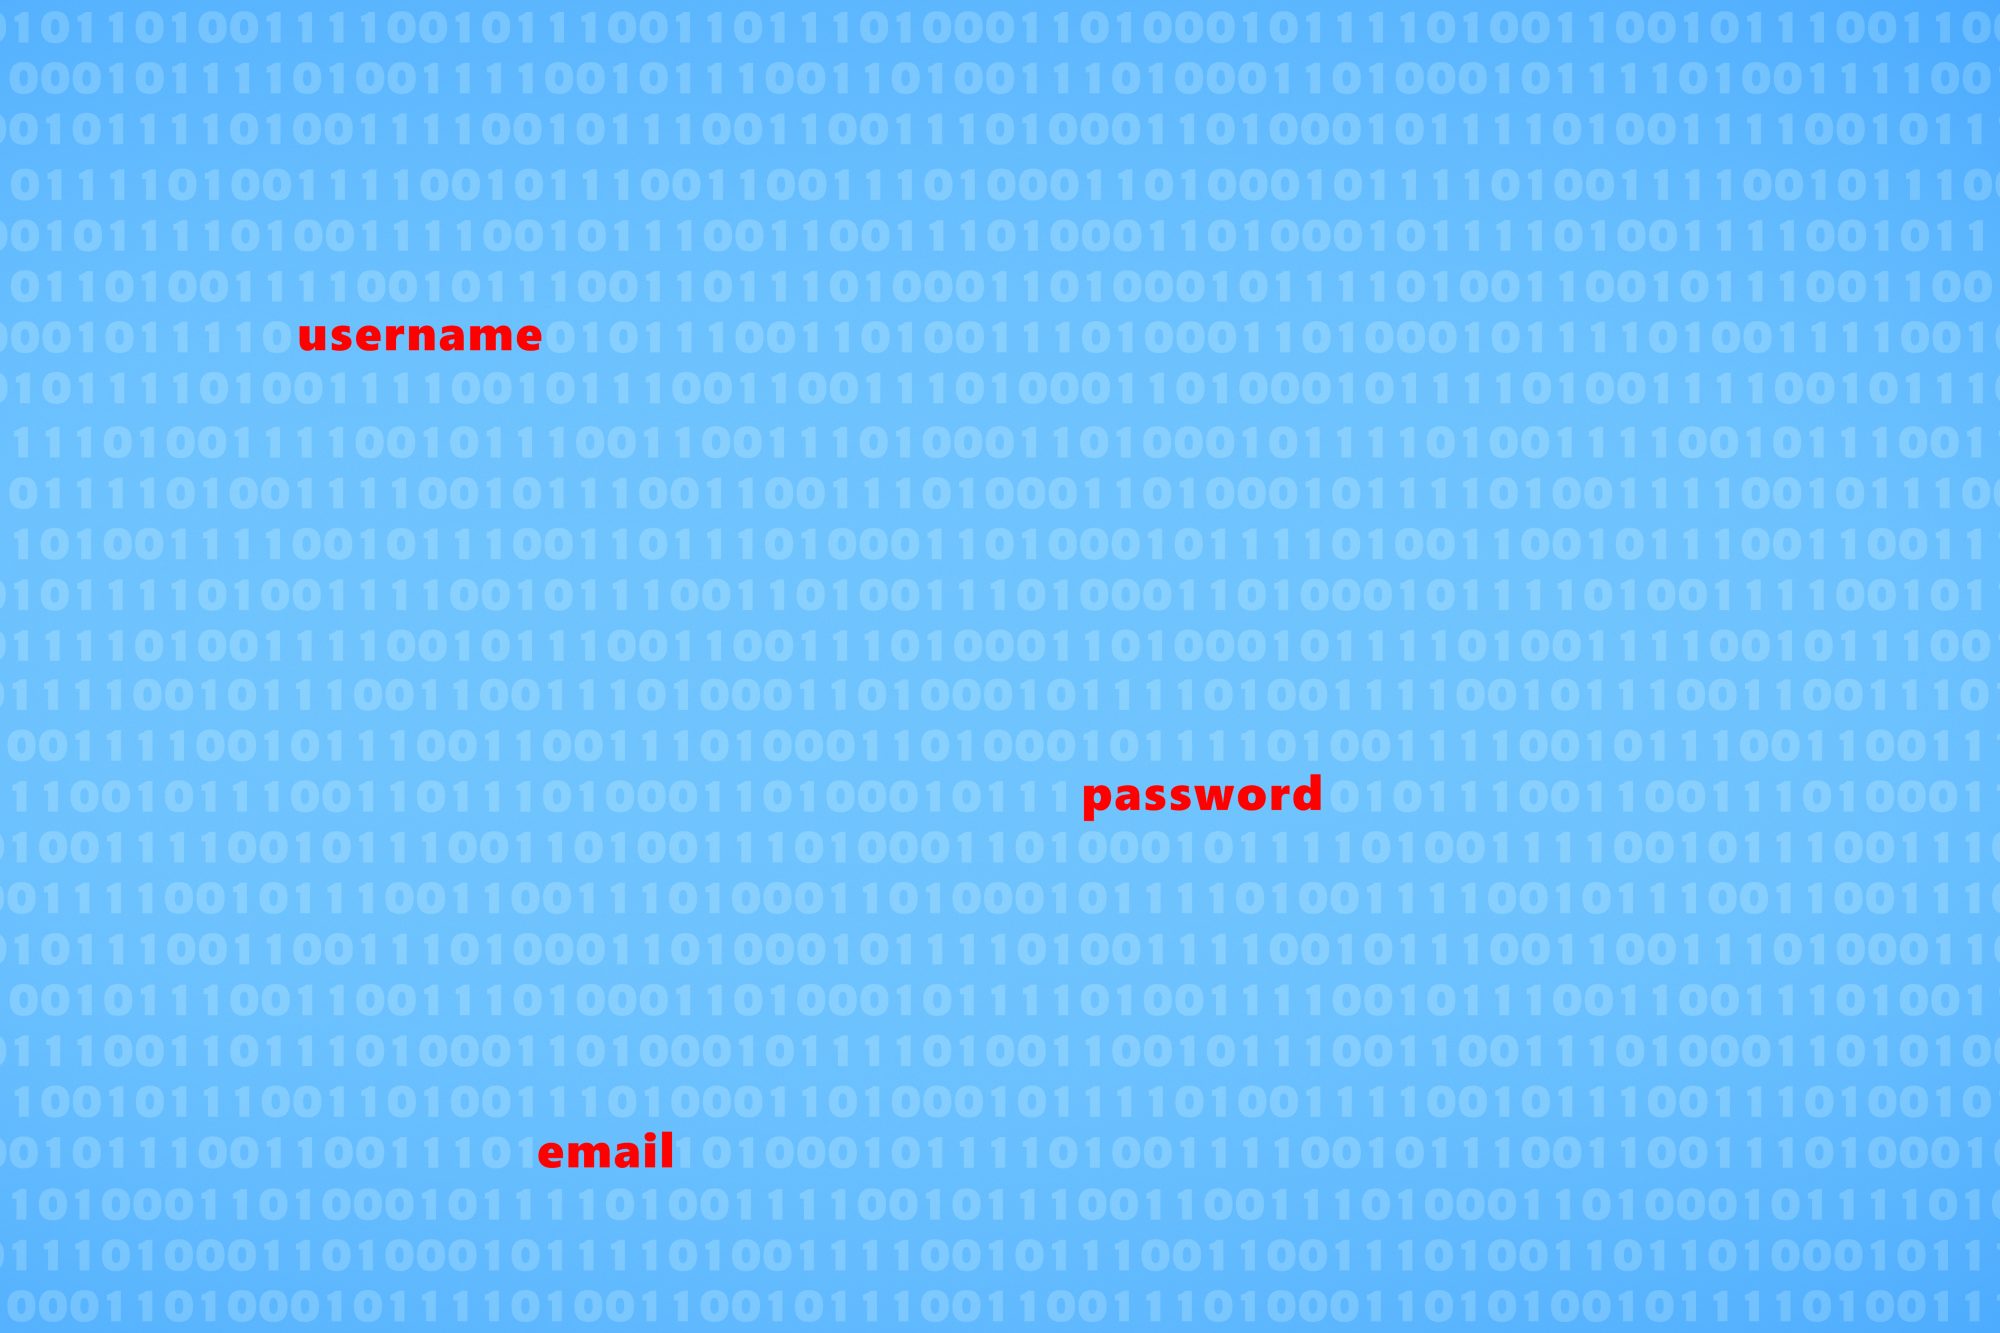 Hacked username password and email data security breach - cybercrime concept